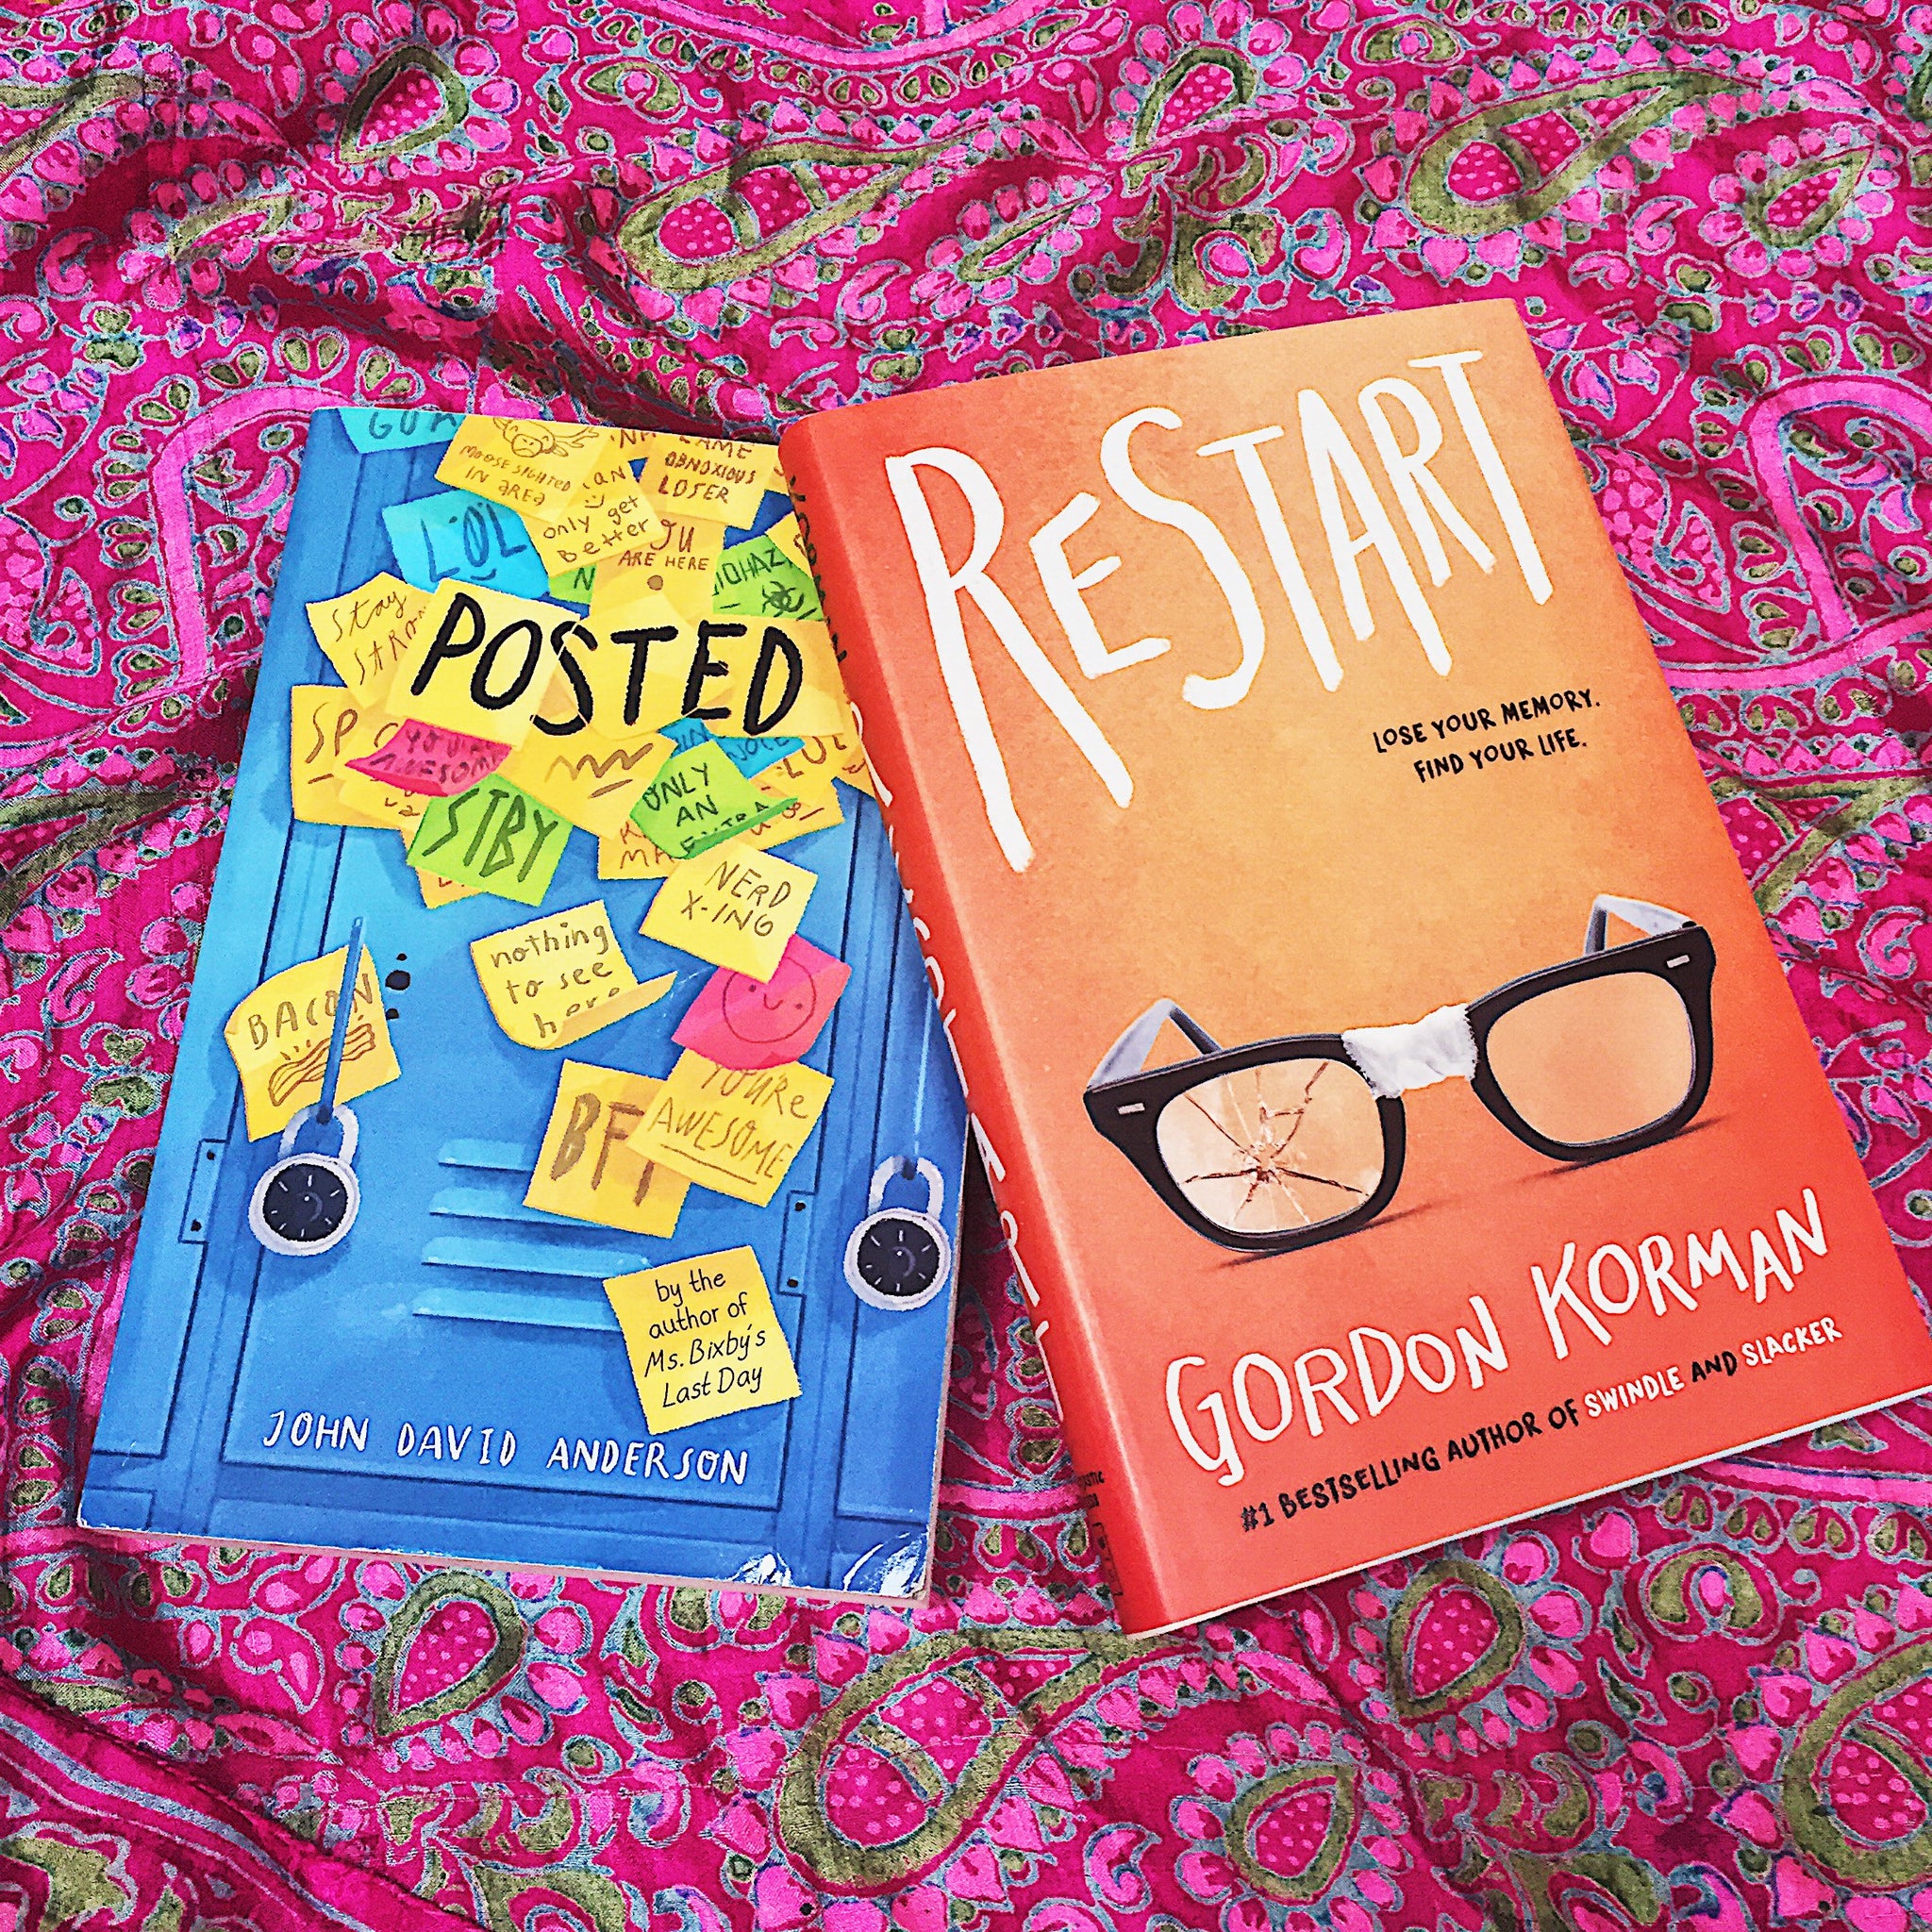 BULLYING: BOOK REVIEWS FOR RESTART BY GORDON KORMAN AND POSTED BY JOHN DAVID ANDERSON